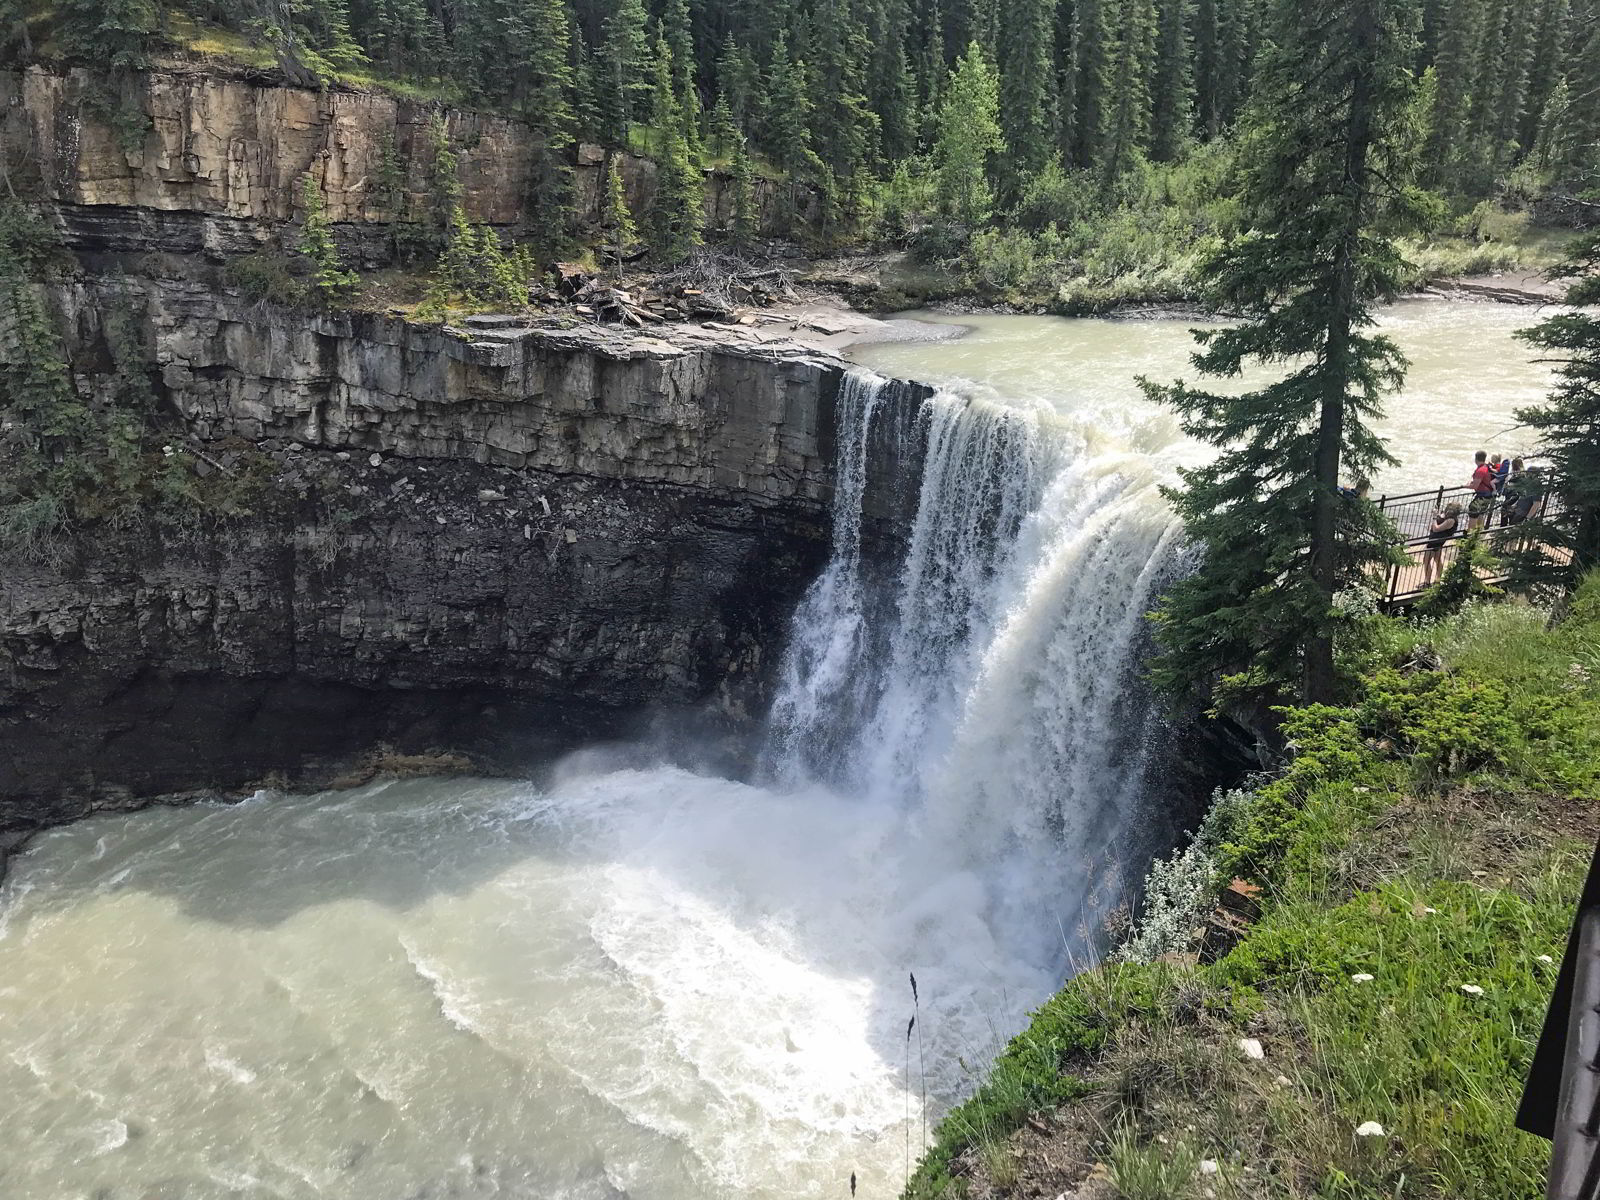 An image of the Crescent Falls Upper Waterfall in David Thompson Country, Alberta - Crescent Falls Hike.